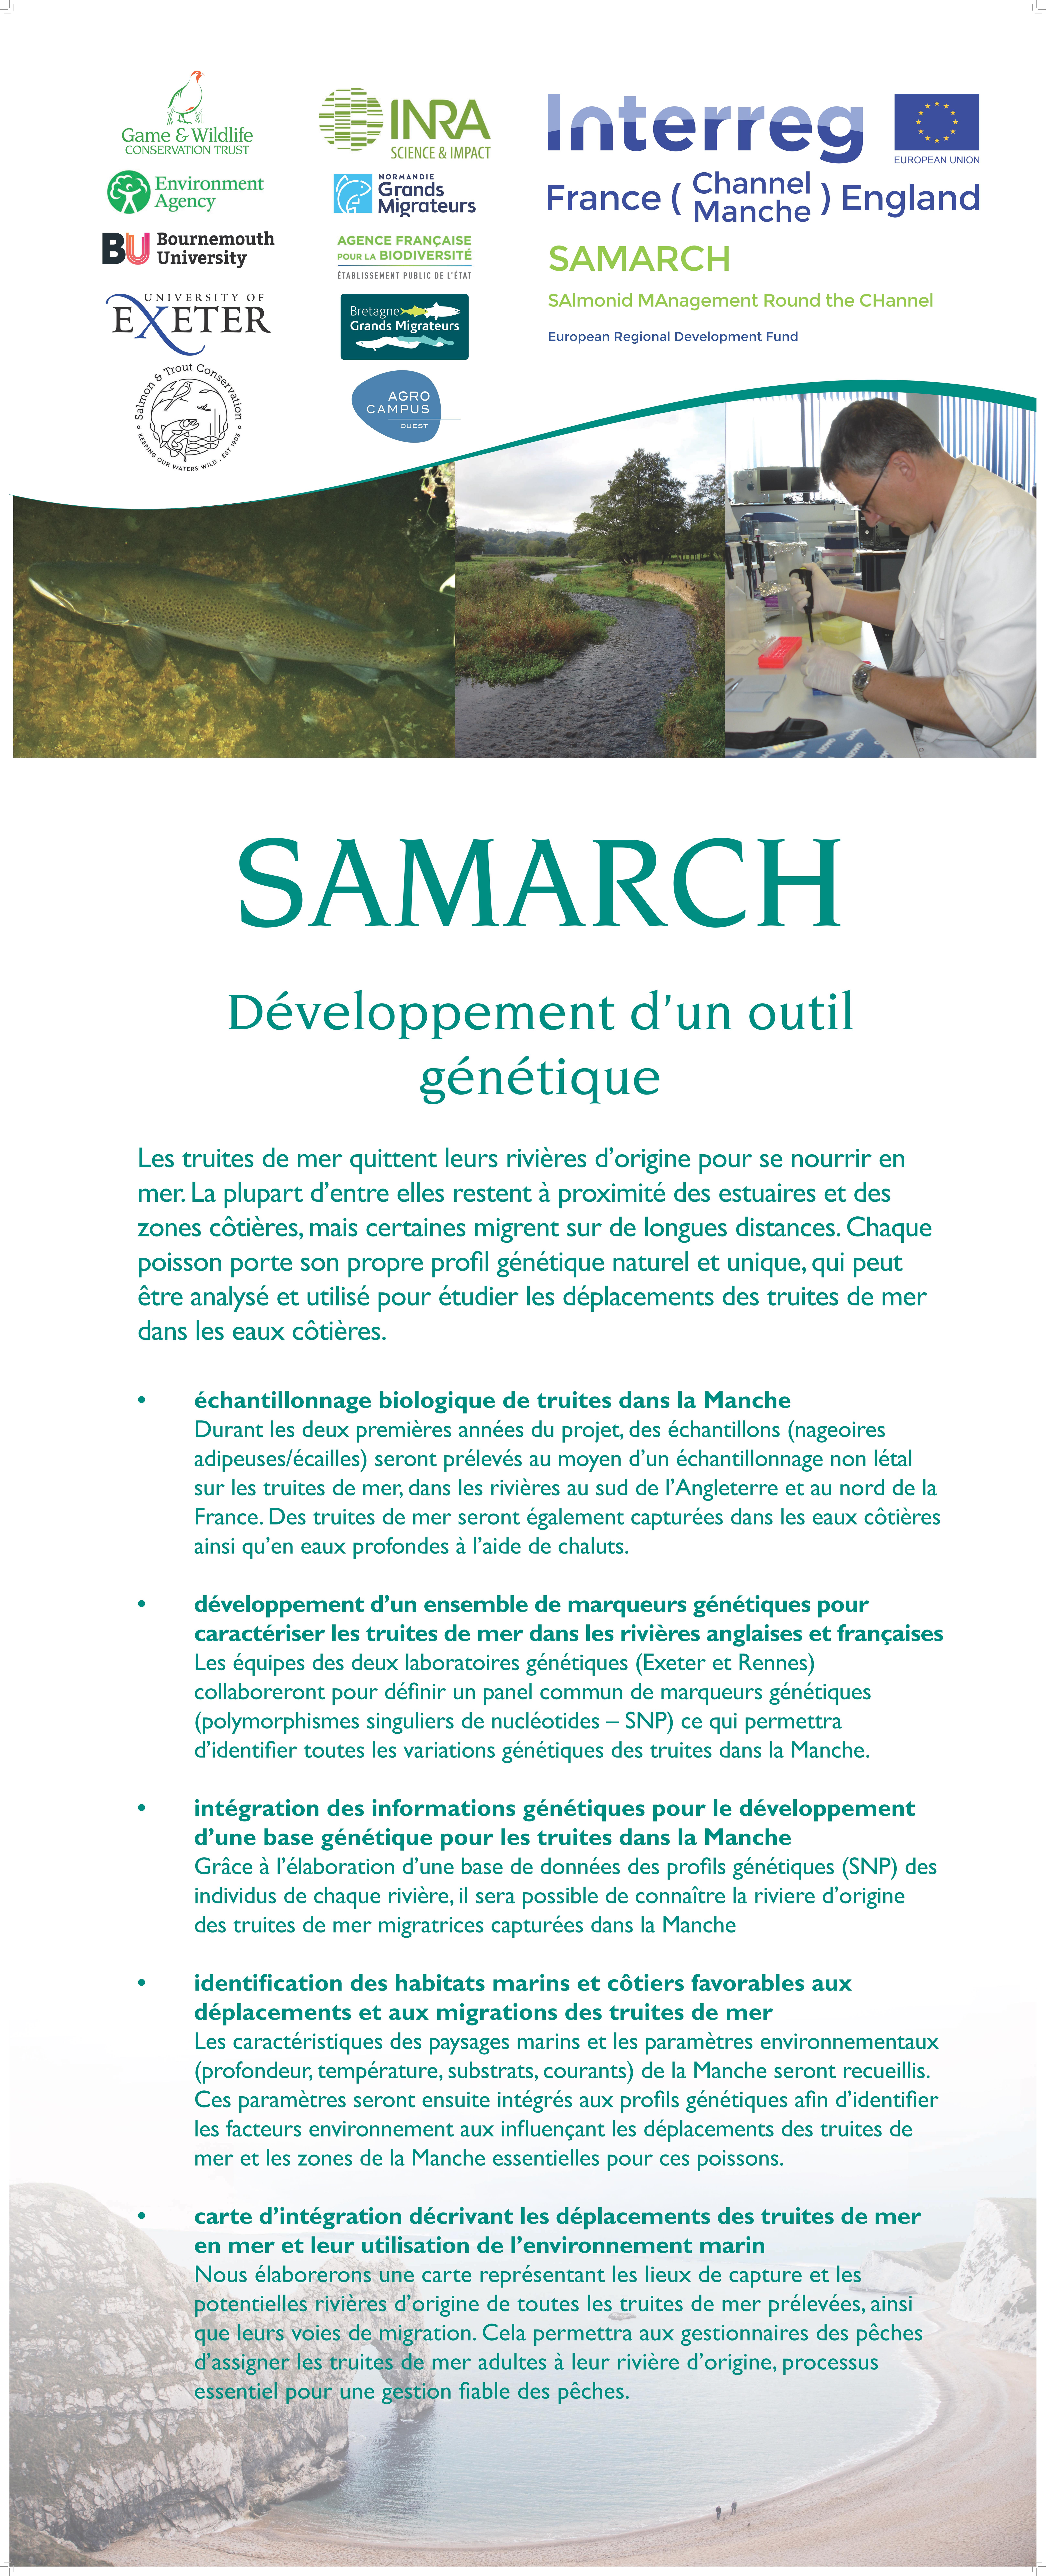 SAMARCH Banners French Nov 2017 Page 4